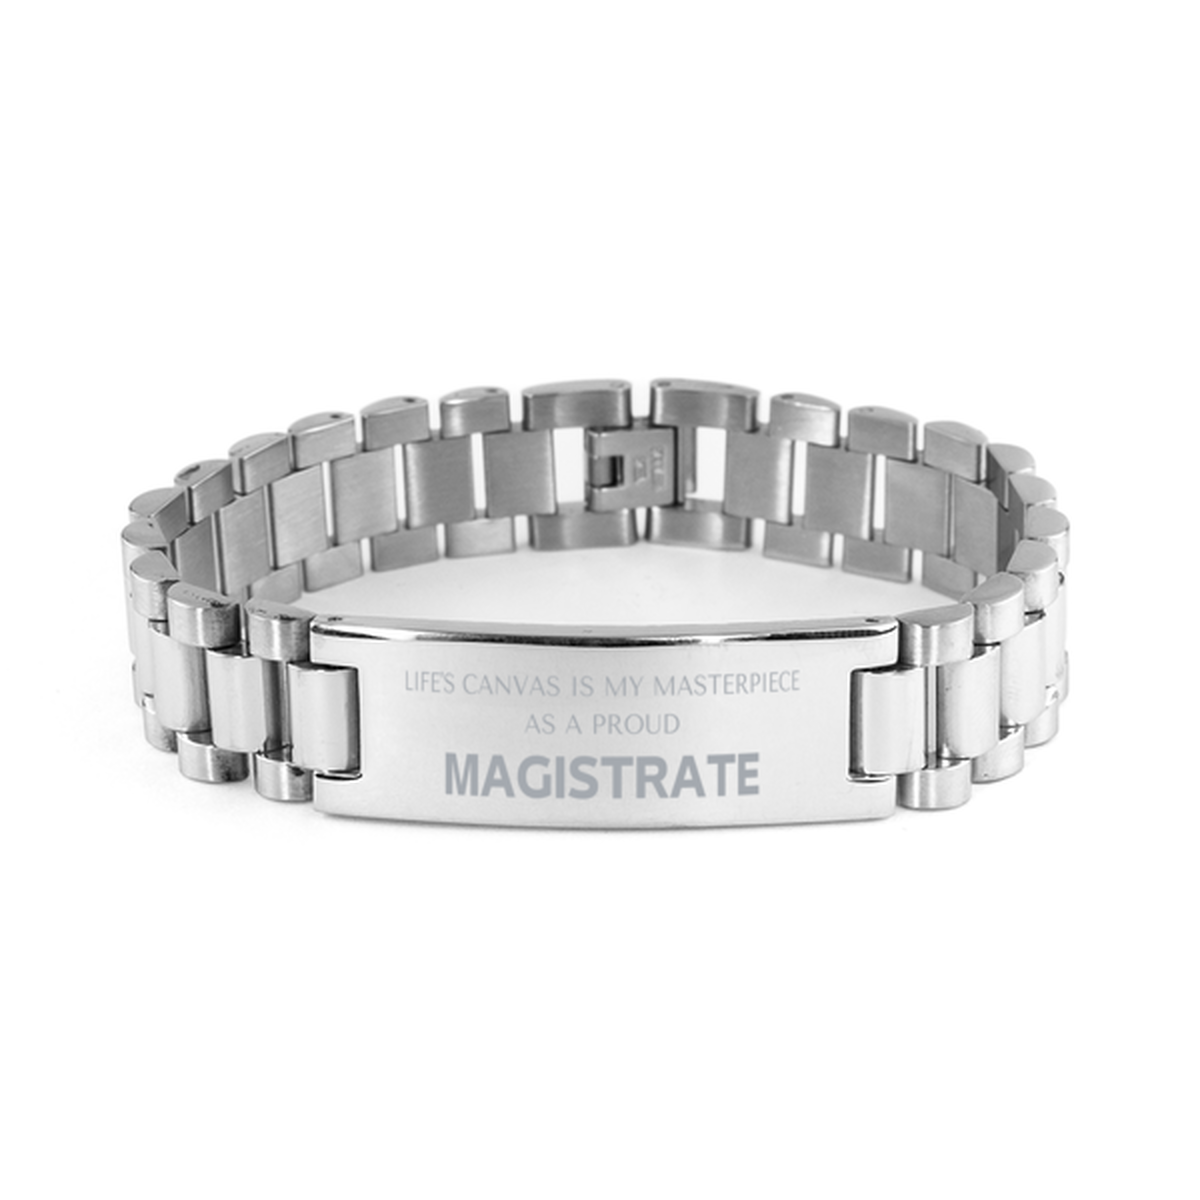 Proud Magistrate Gifts, Life's canvas is my masterpiece, Epic Birthday Christmas Unique Ladder Stainless Steel Bracelet For Magistrate, Coworkers, Men, Women, Friends